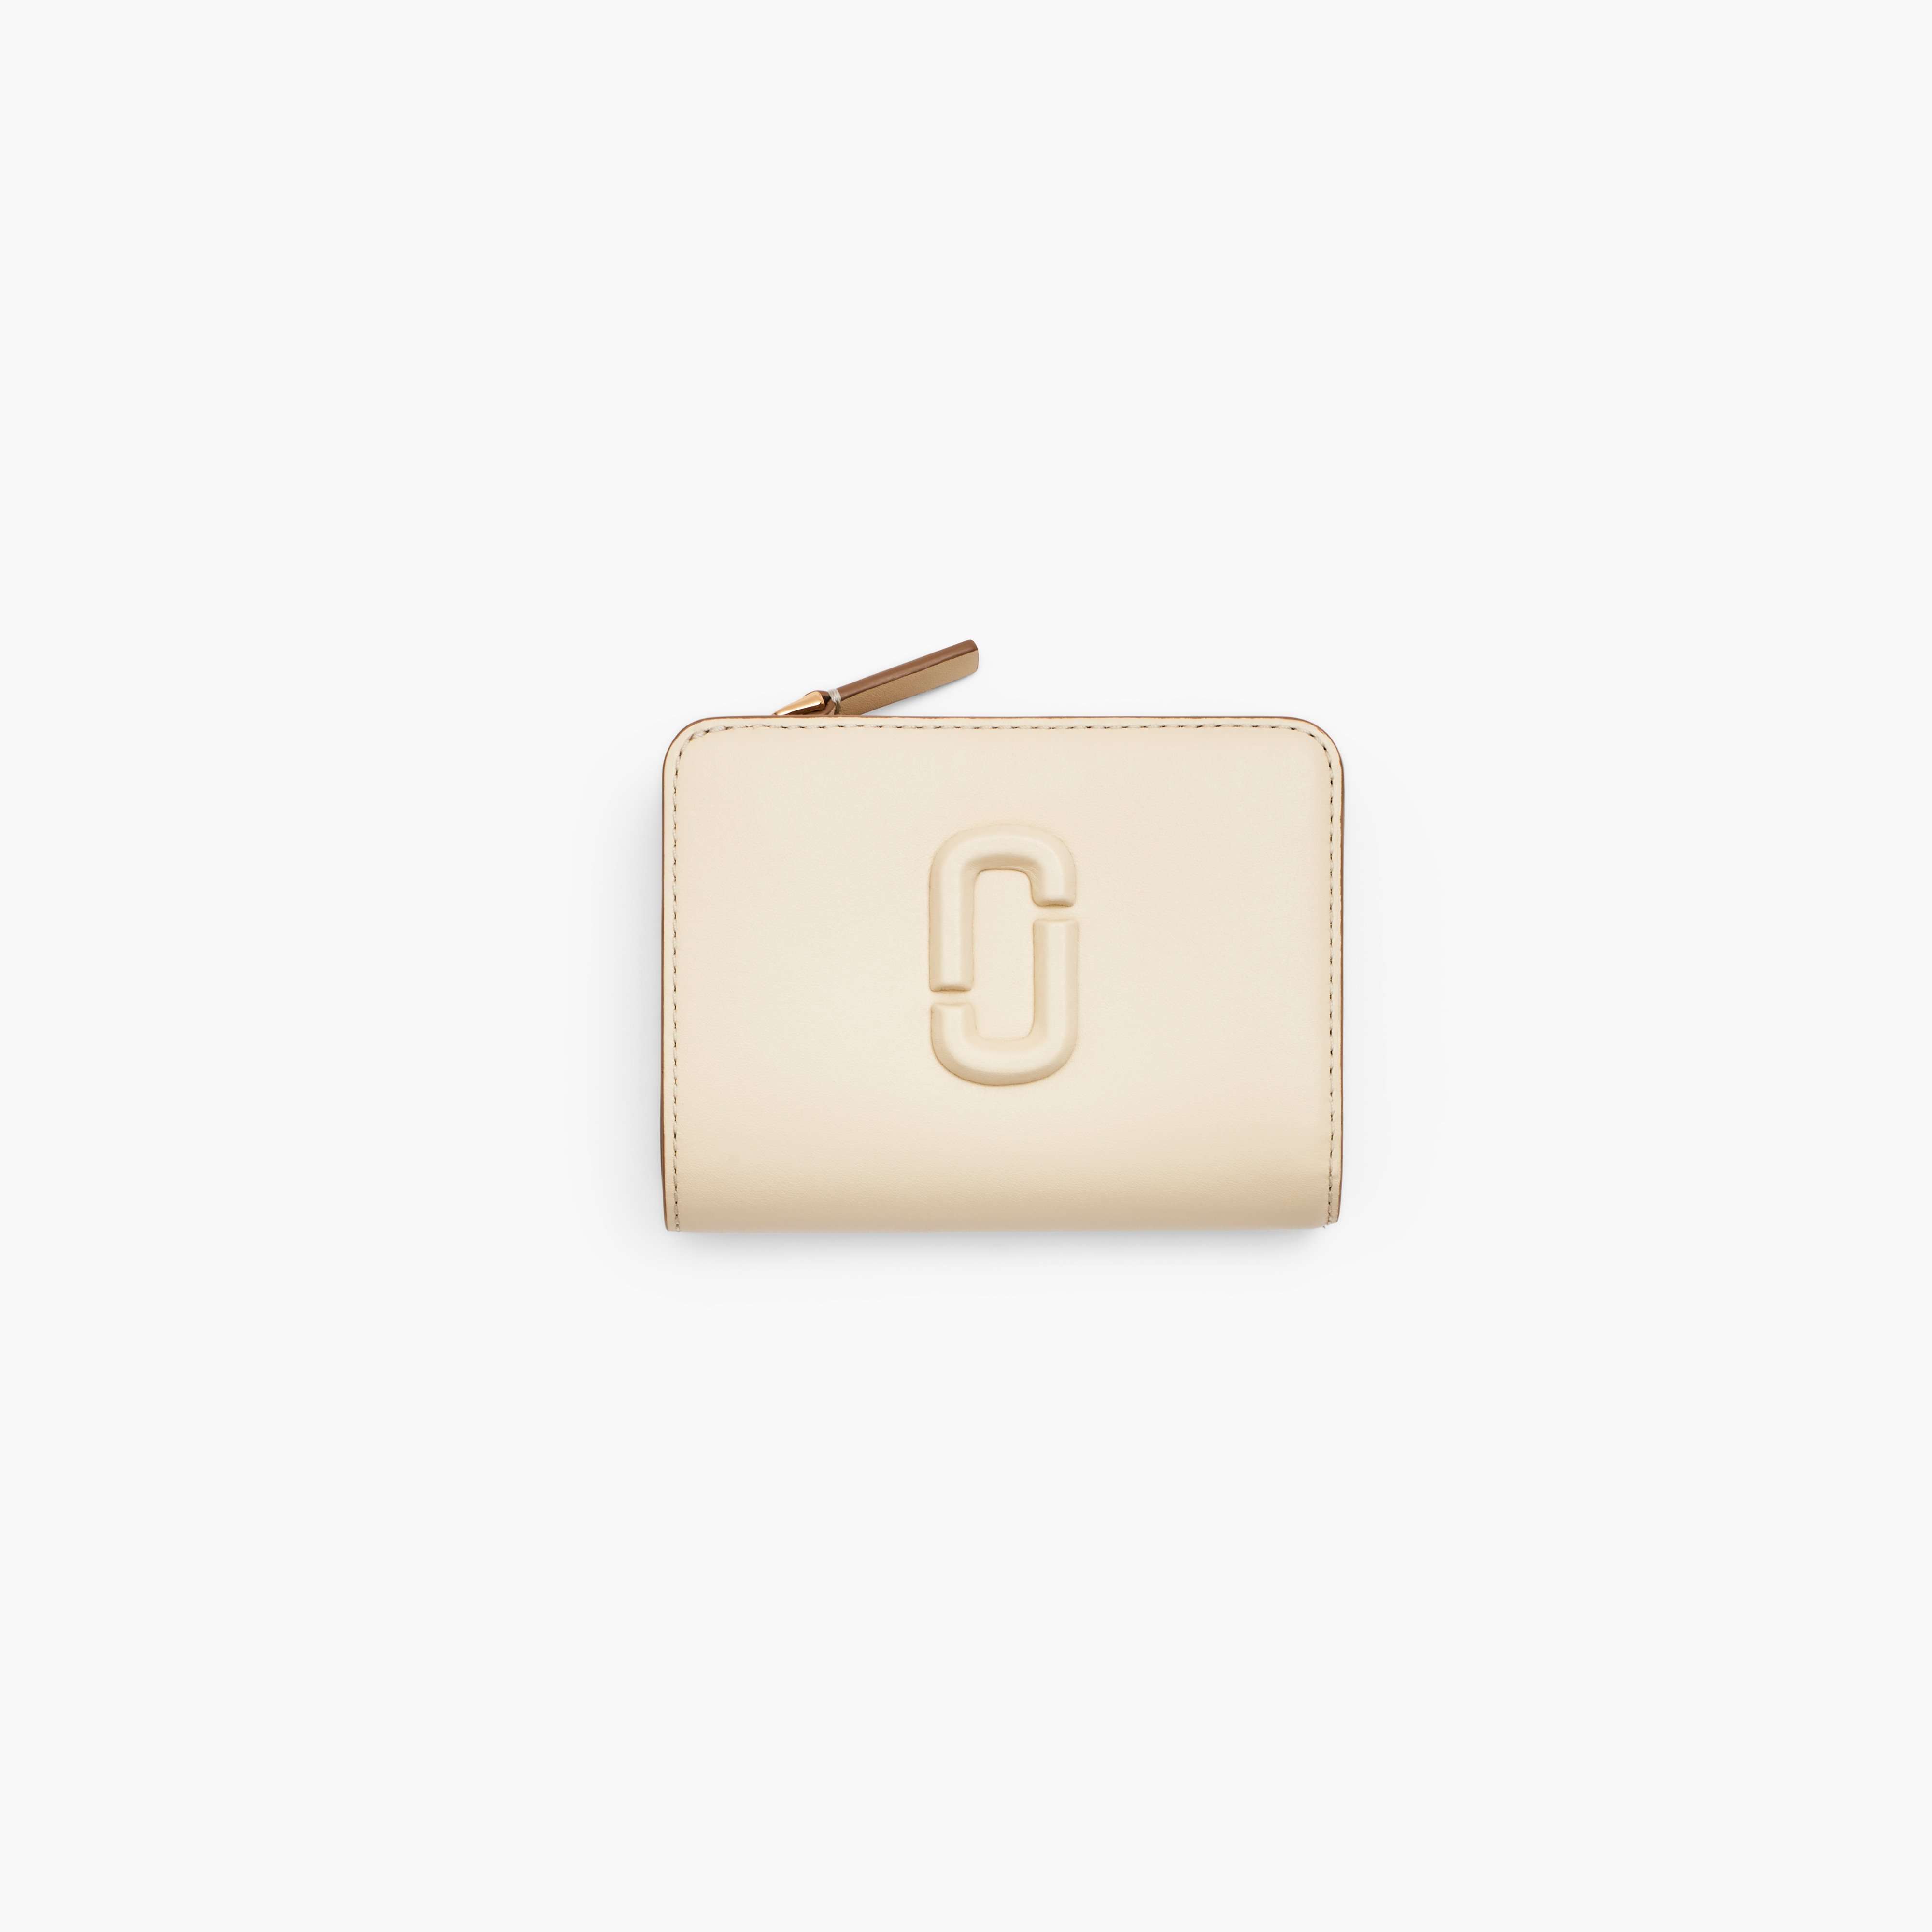 The Leather J Marc Mini Compact Wallet in Cloud White